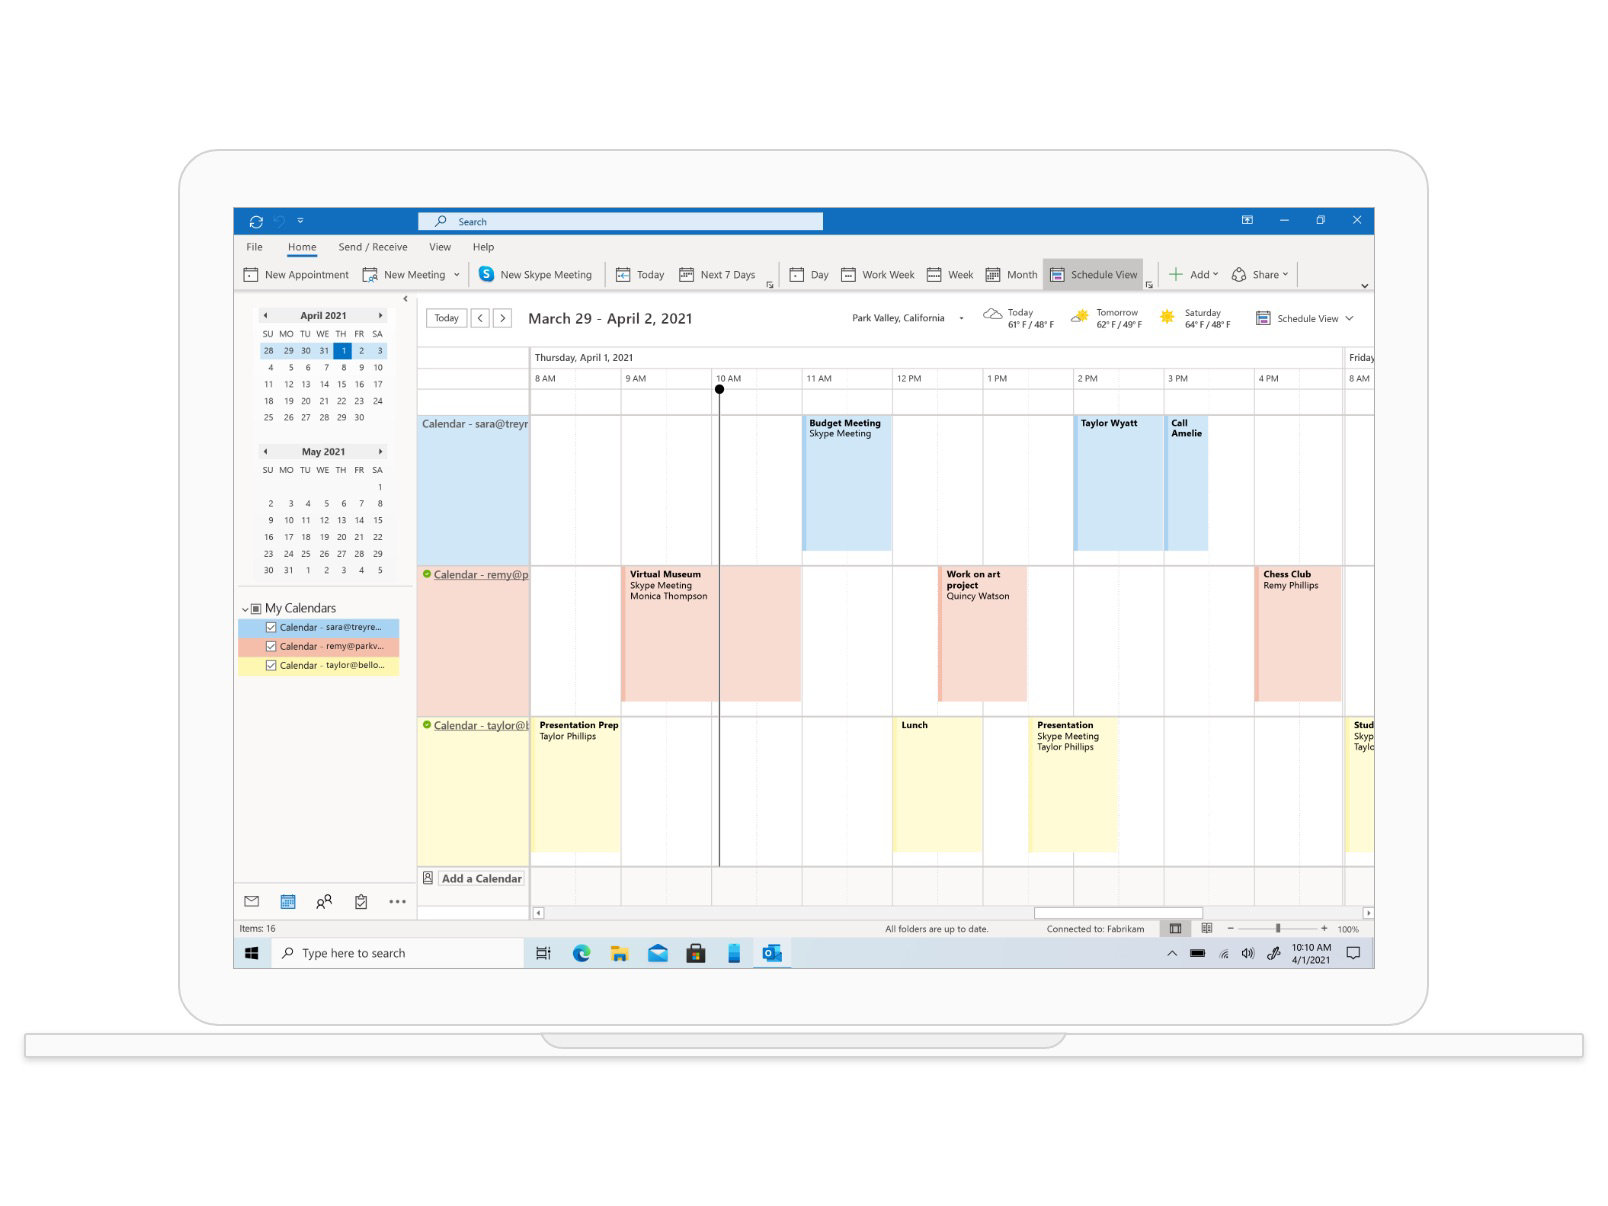 A calendar view in Outlook showing meetings and appointments for the week of March 29.